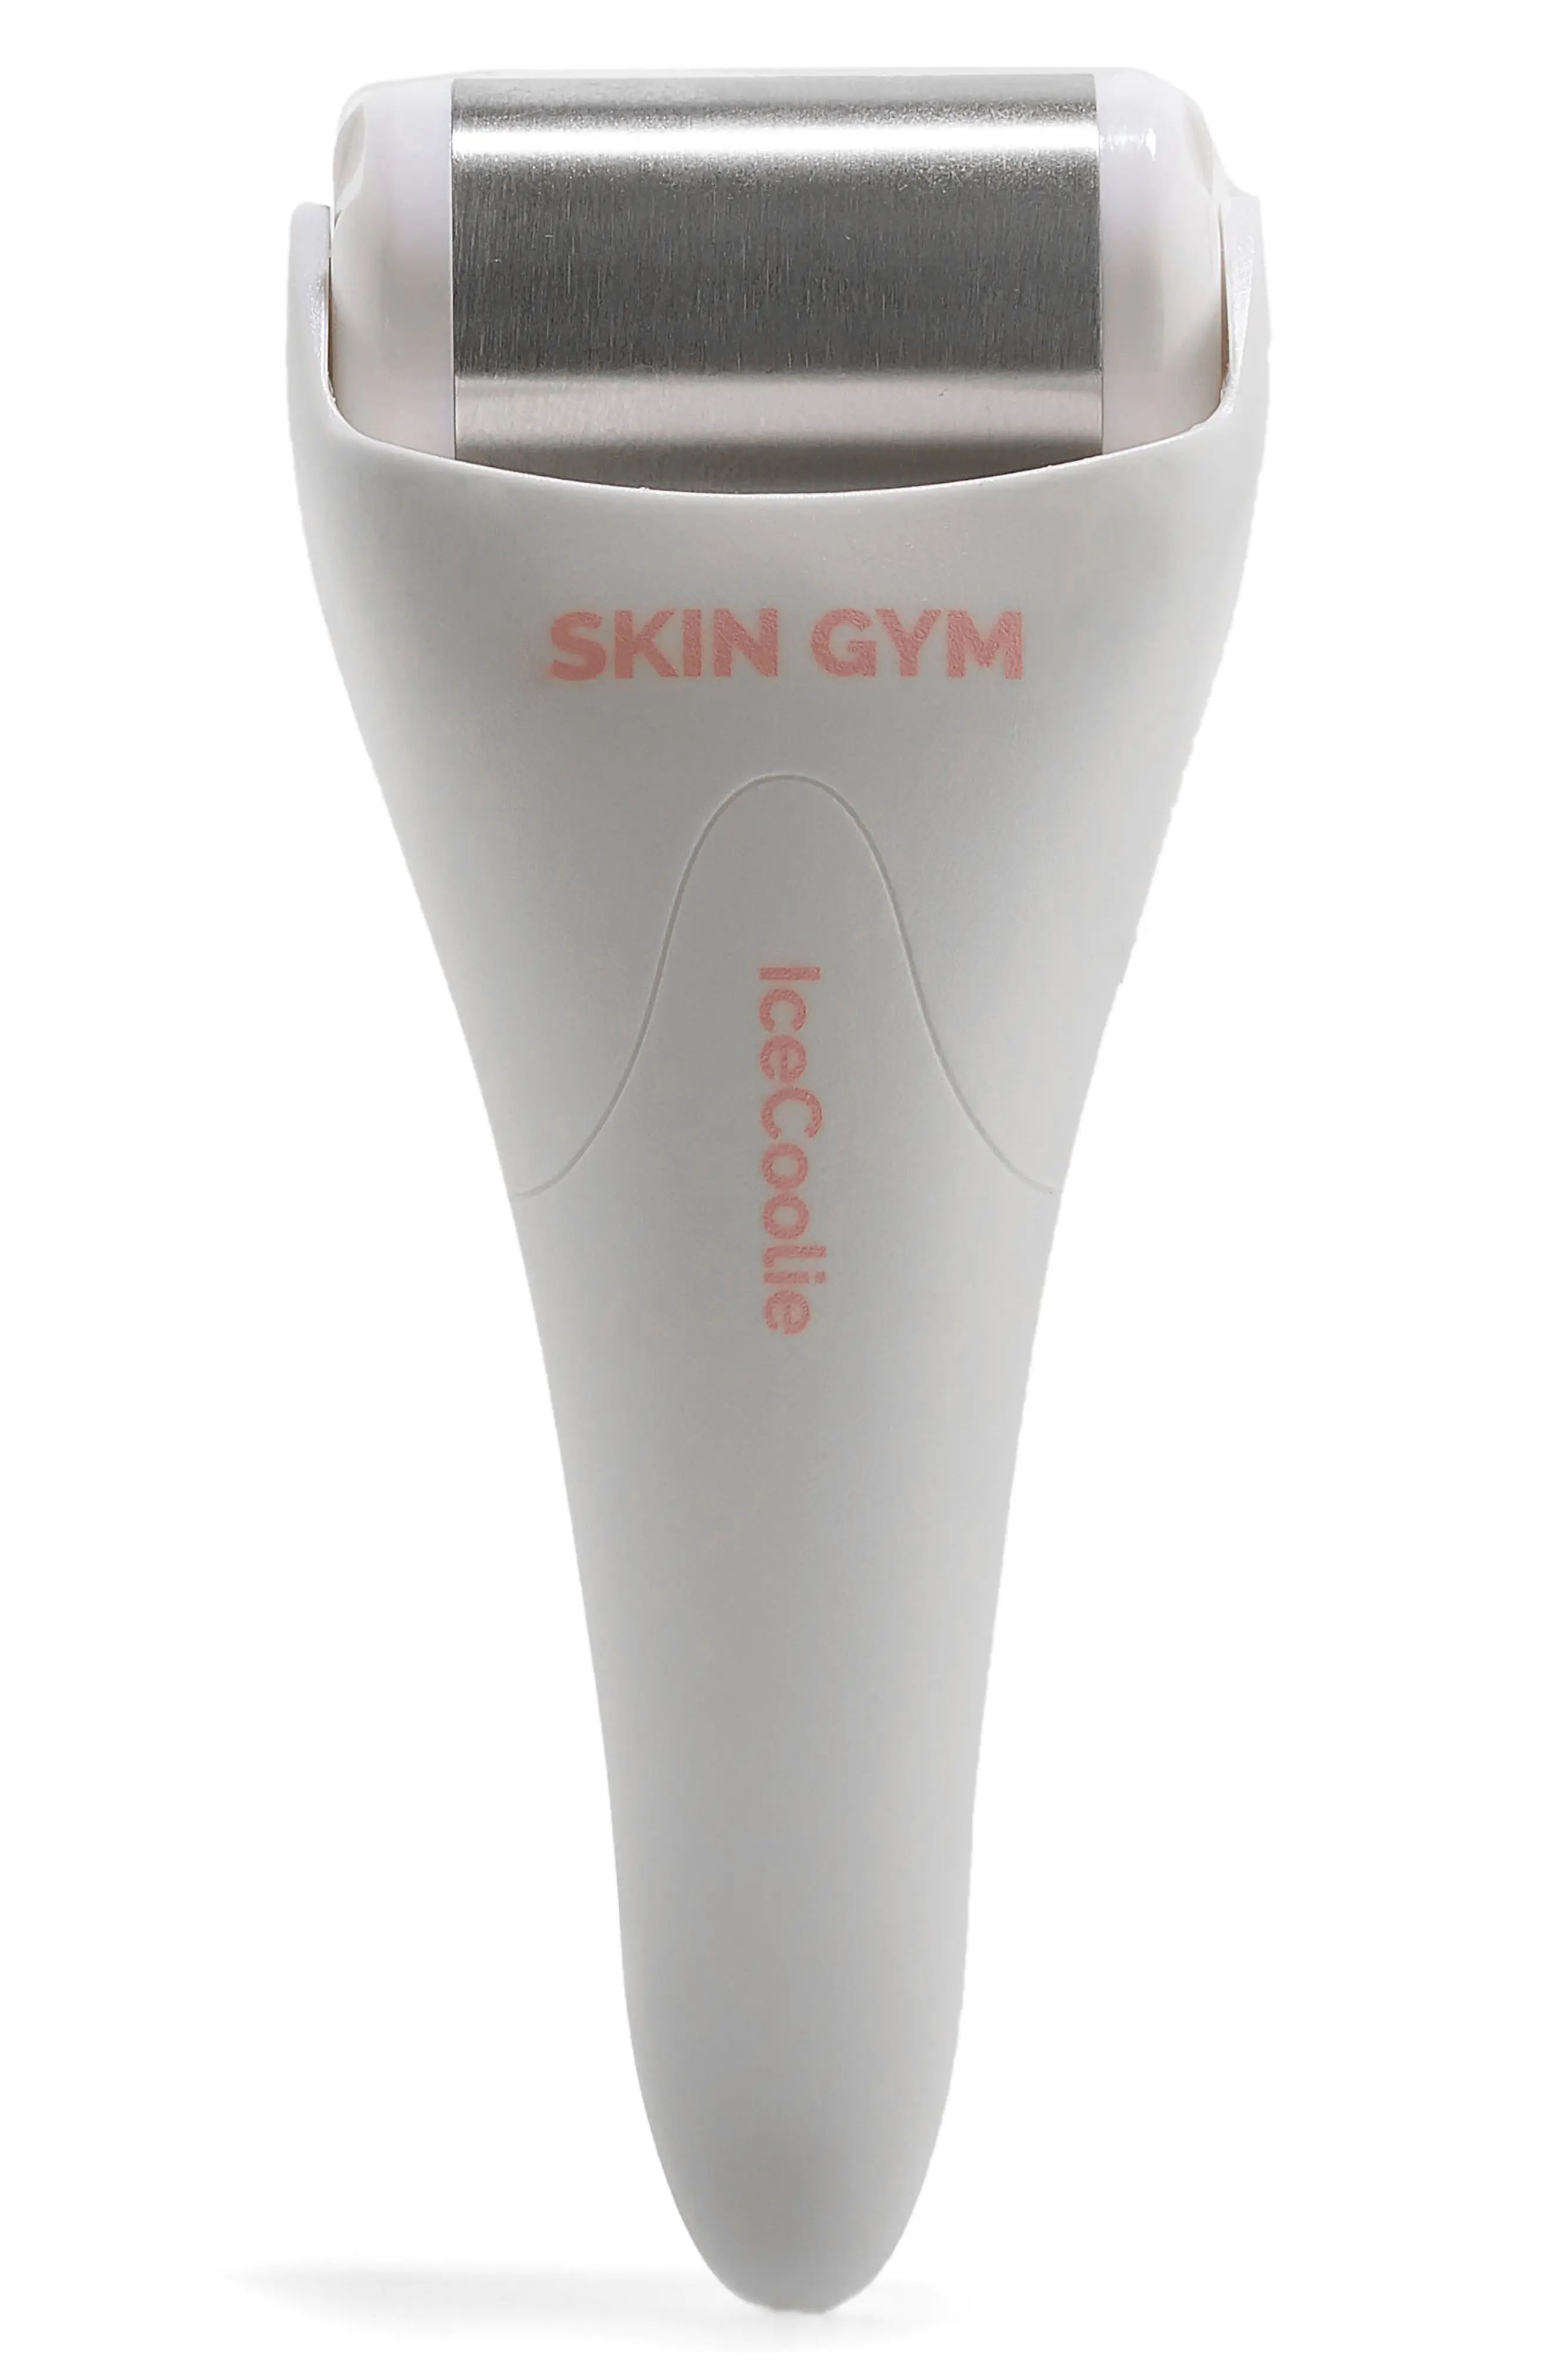 Skin Gym IceCoolie Ice Therapy Device at Nordstrom | Nordstrom